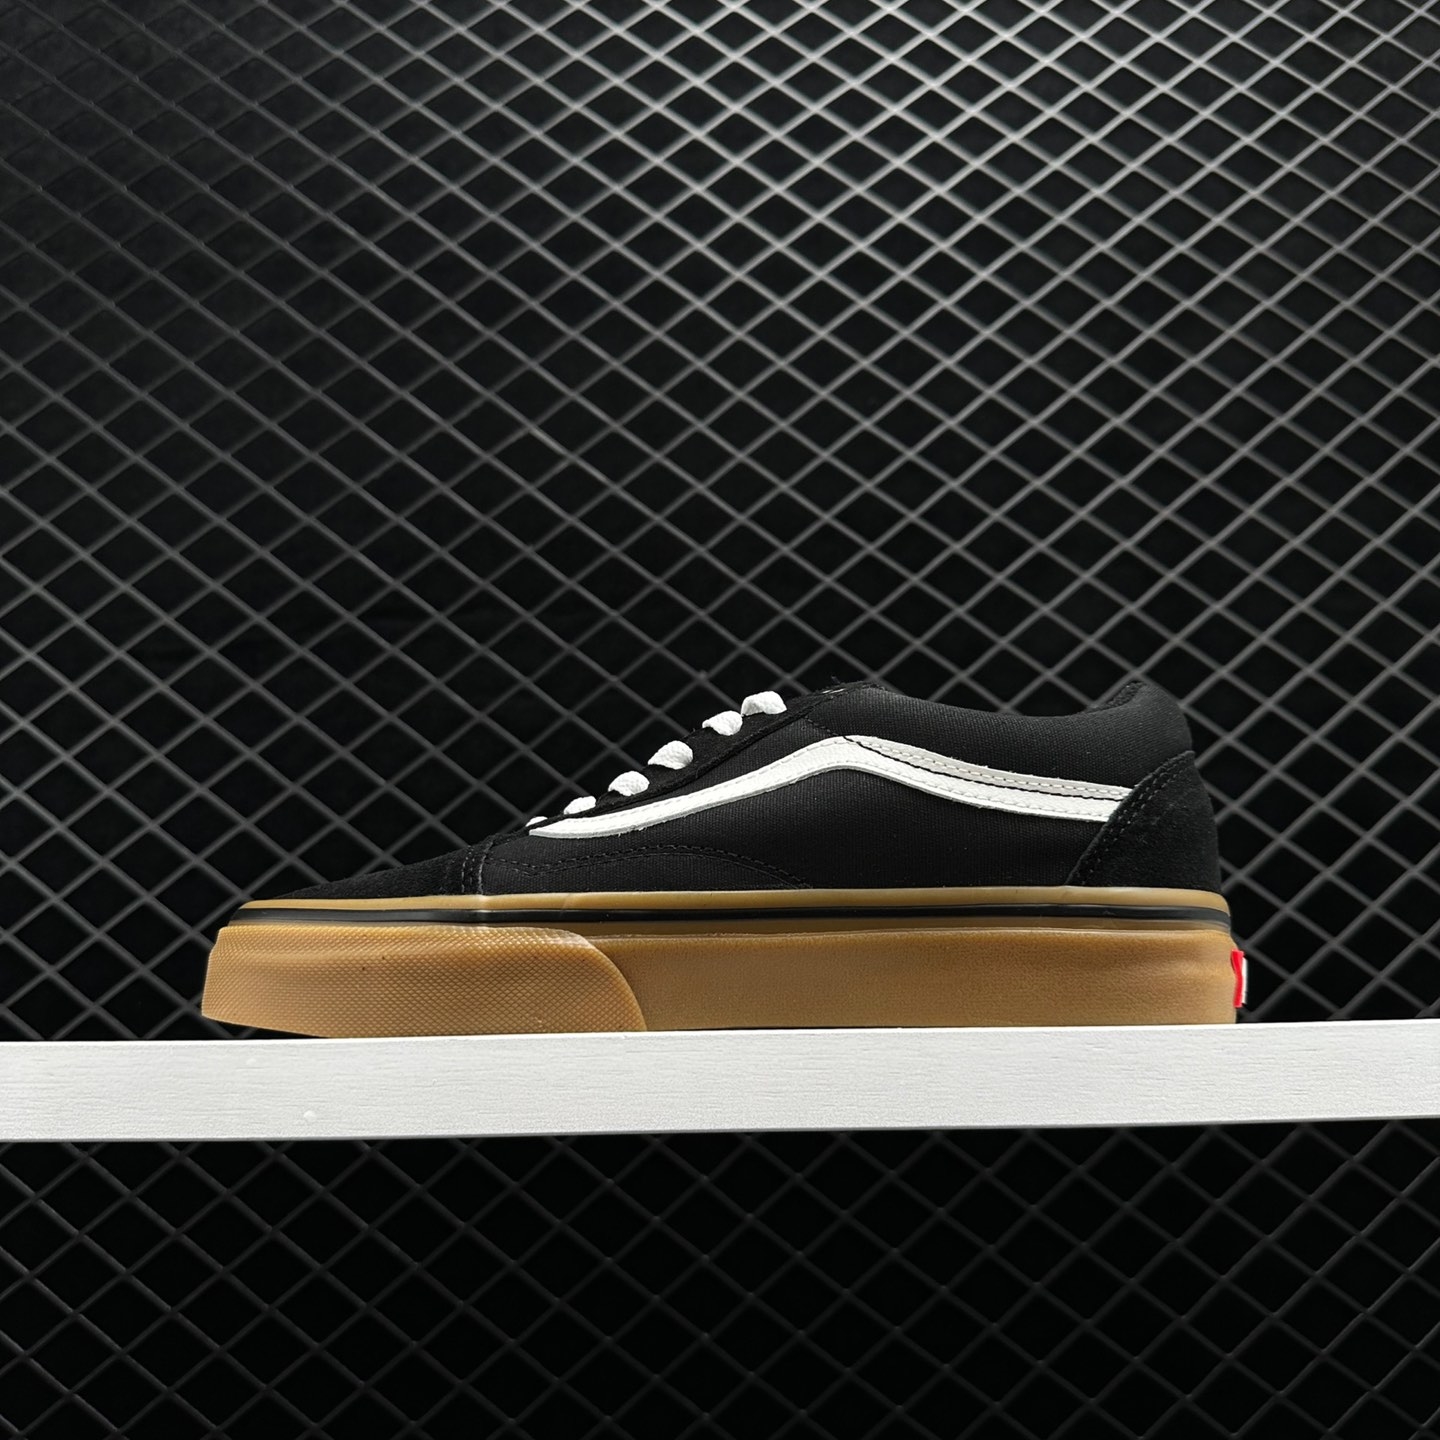 Vans Old Skool Pro Black: Classic Style with Modern Performance